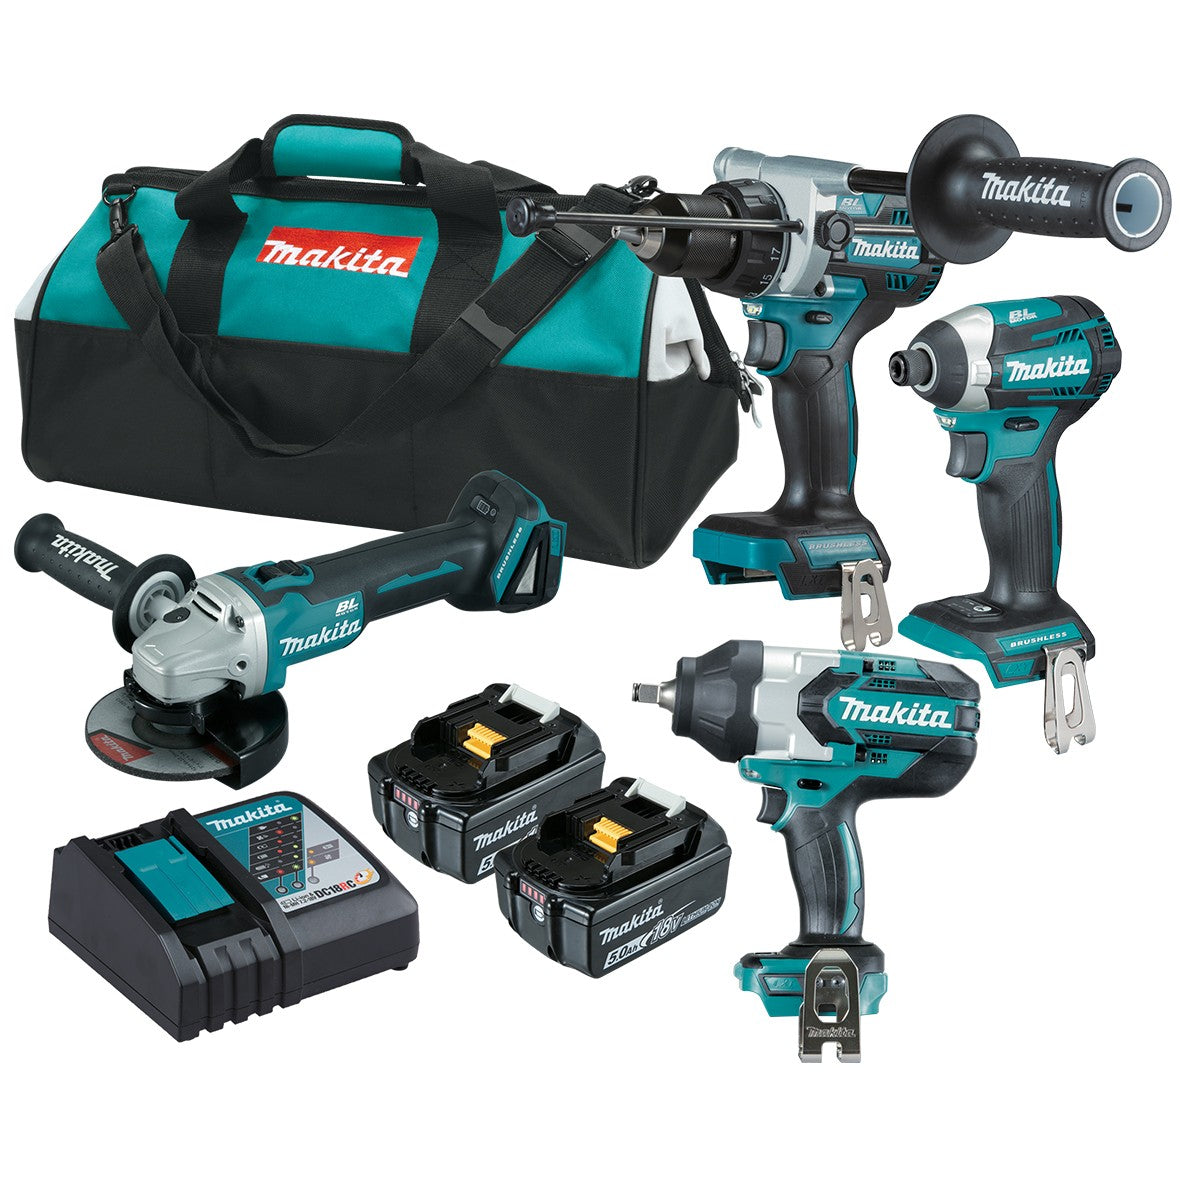 18V 5.0Ah 4Pce Brushless Hammer Drill + Impact Drill + Angle Grinder + Impact Wrench Kit DLX4144TX1 by Makita